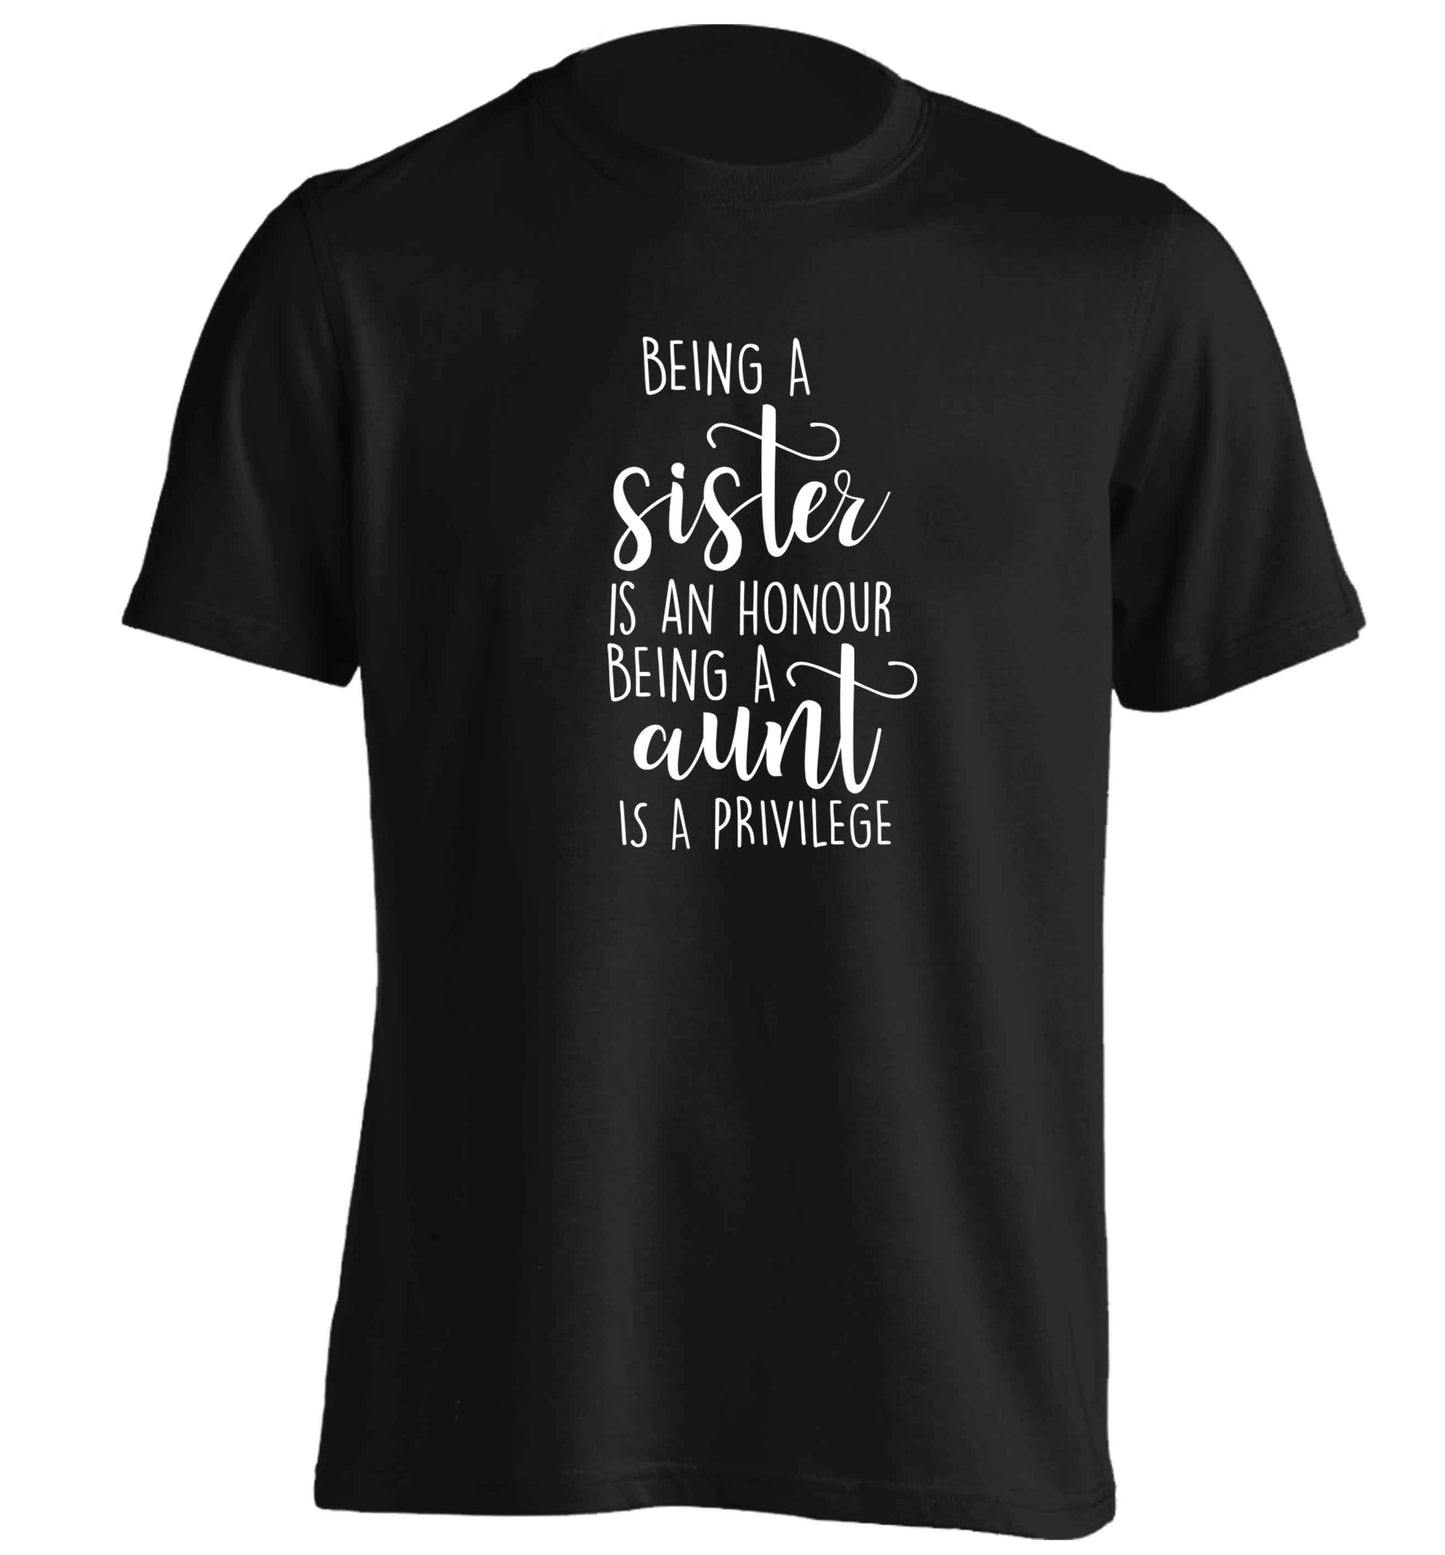 Being a sister is an honour being an auntie is a privilege adults unisex black Tshirt 2XL